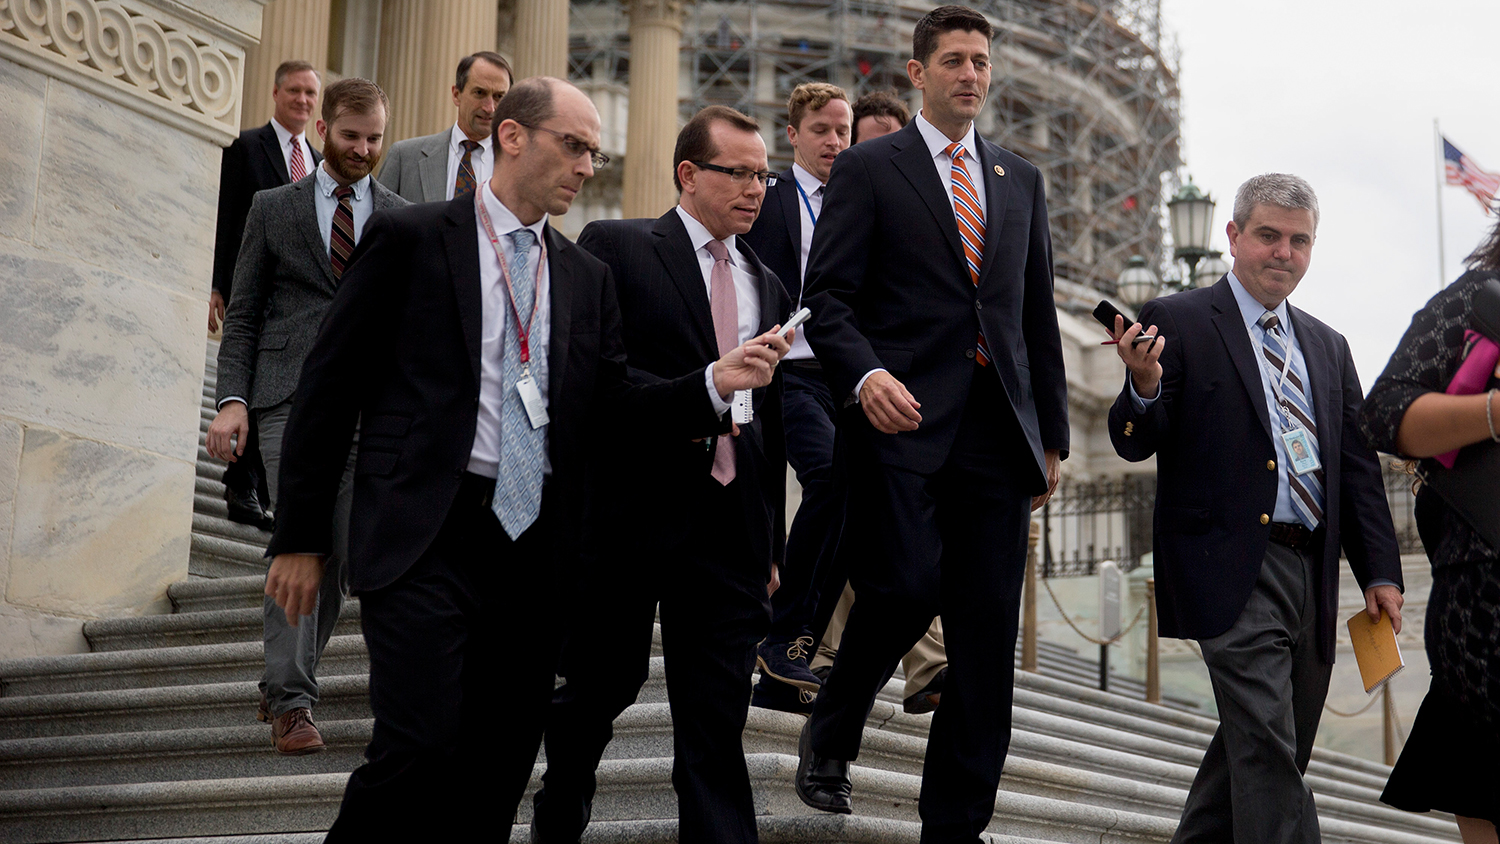 Representative Paul Ryan, center right, walks down the steps of the U.S. Capitol building following a vote on Oct. 9, 2015.
